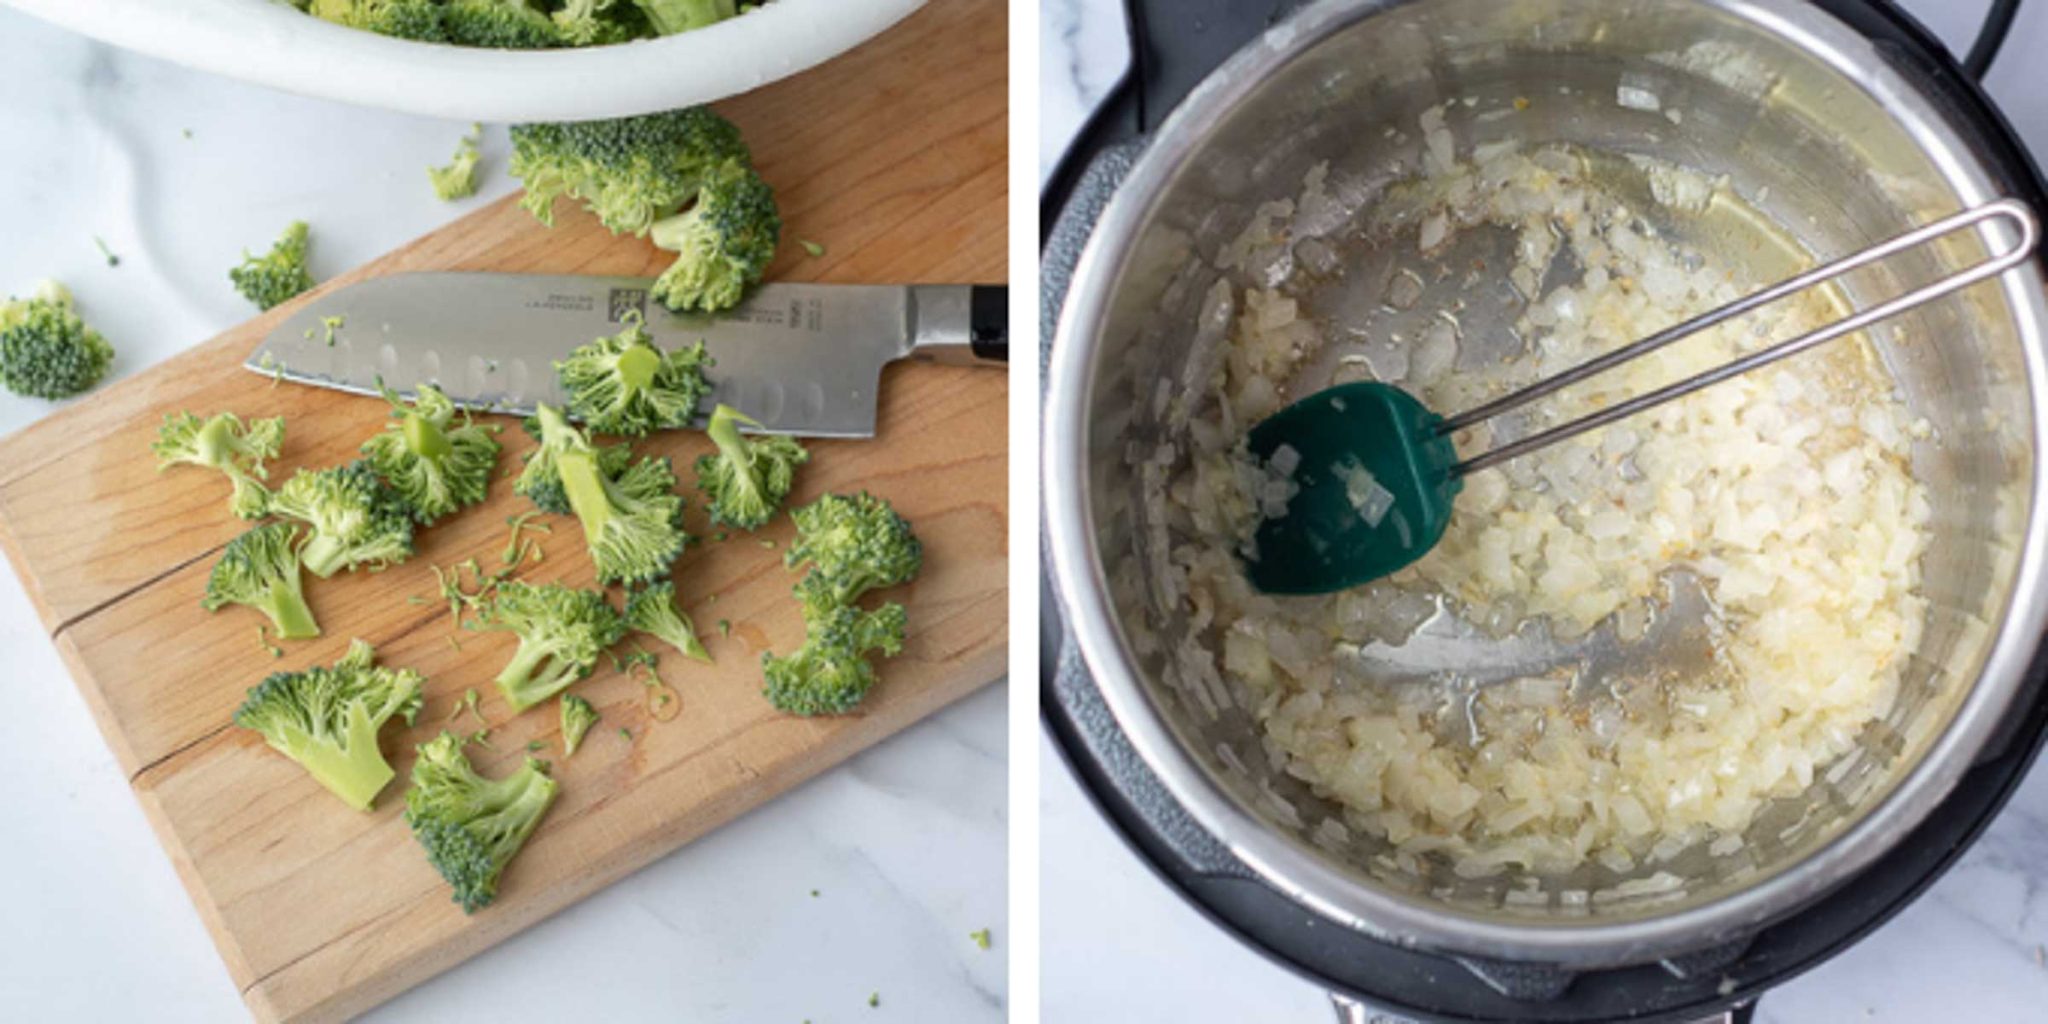 more images images showing how to make broccoli cheddar soup